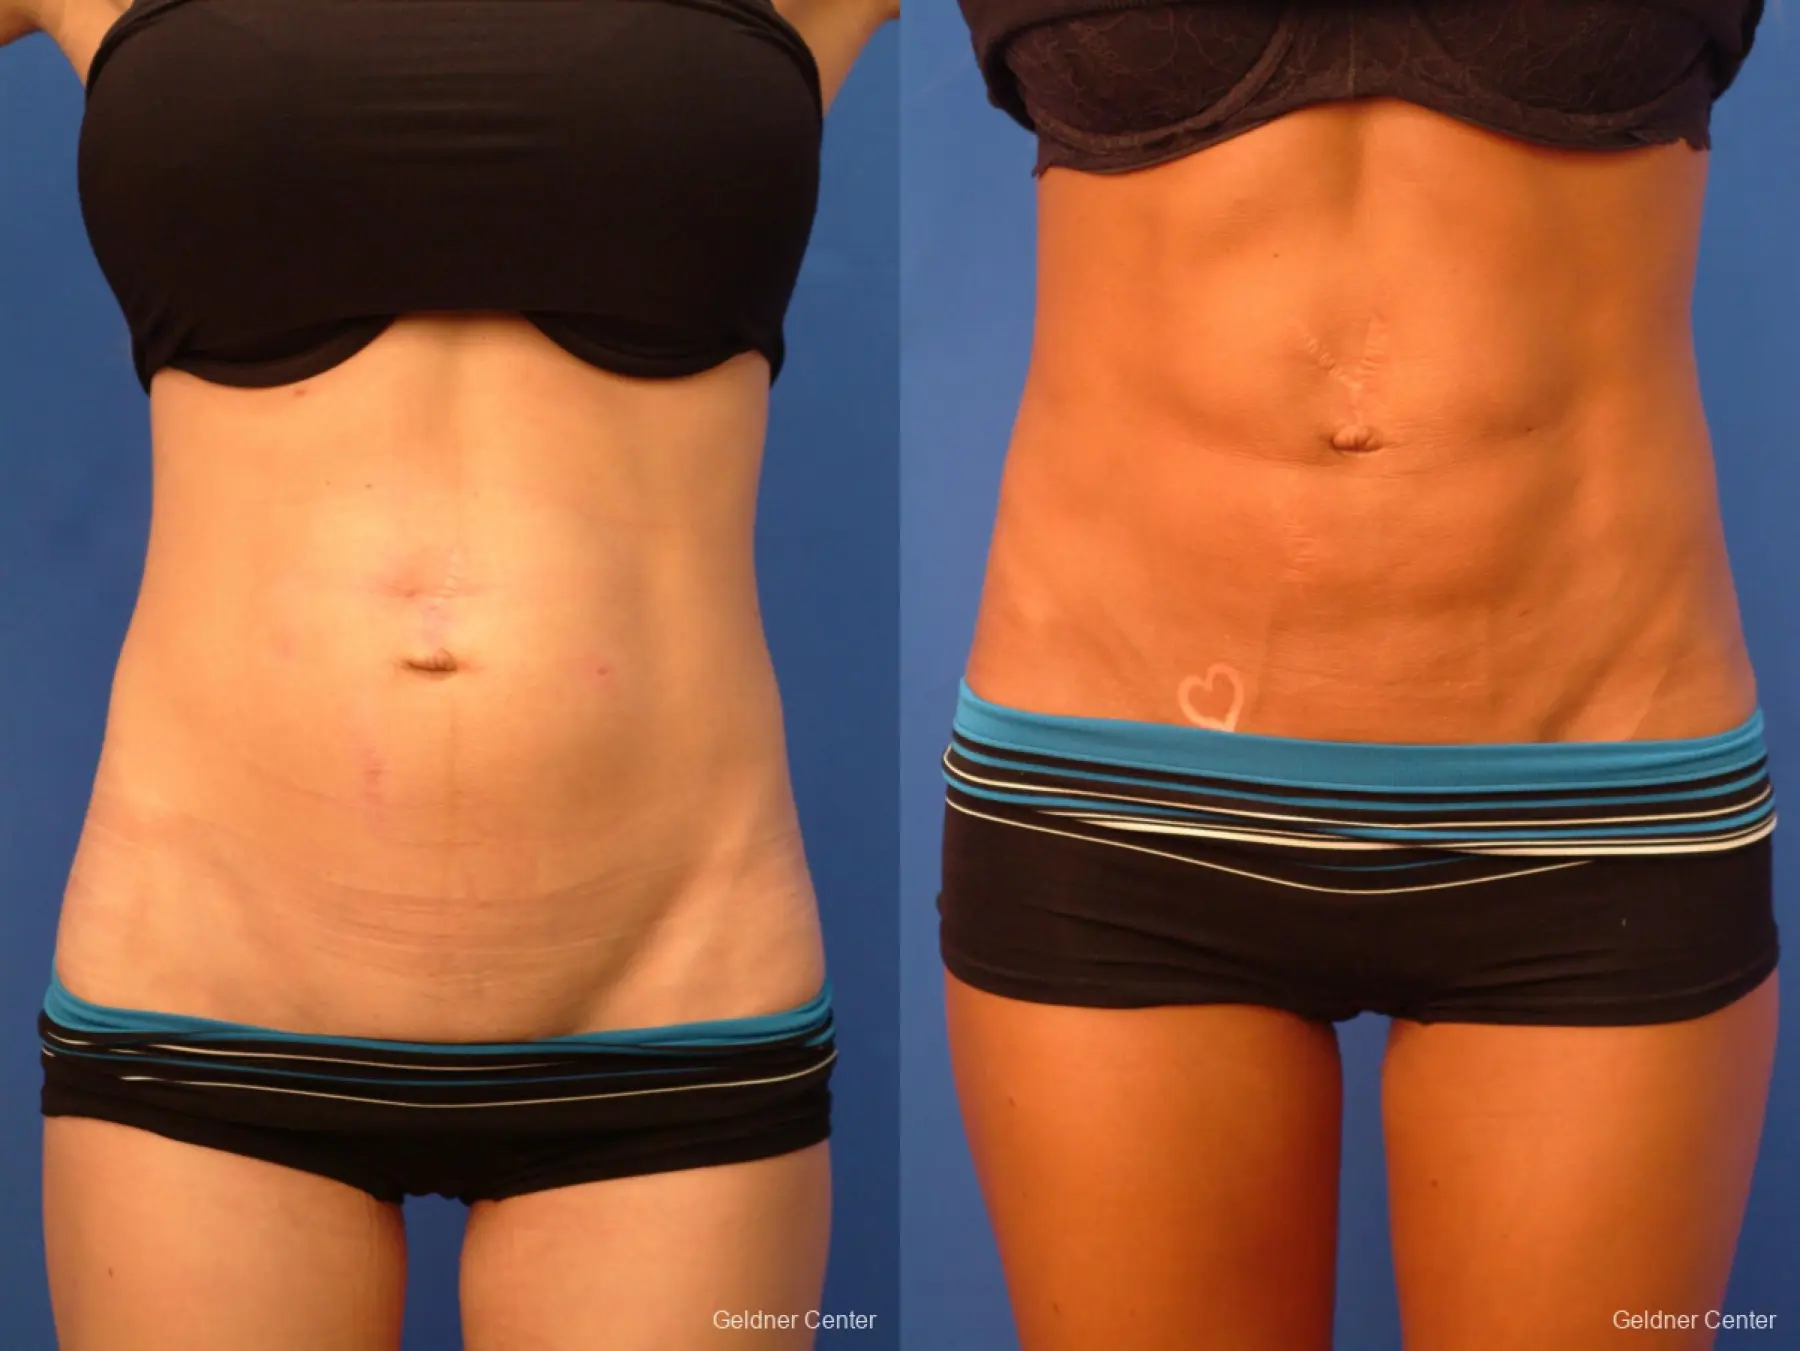  Vaser Liposuction with Abdominal Etching - Before and After 